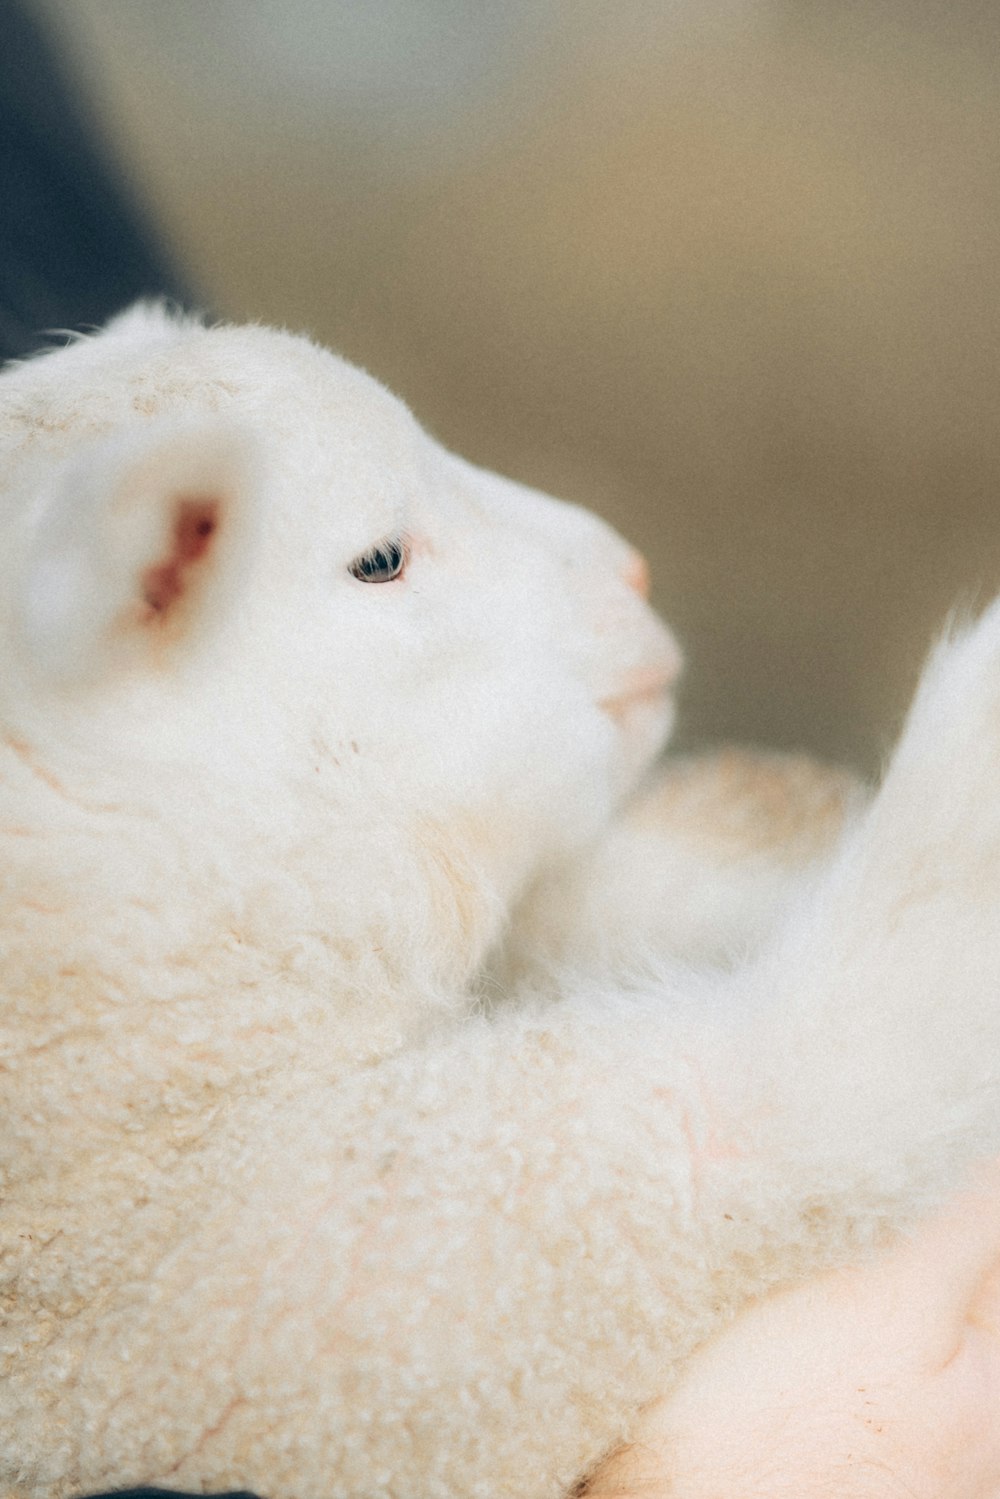 a baby lamb is being held by someone